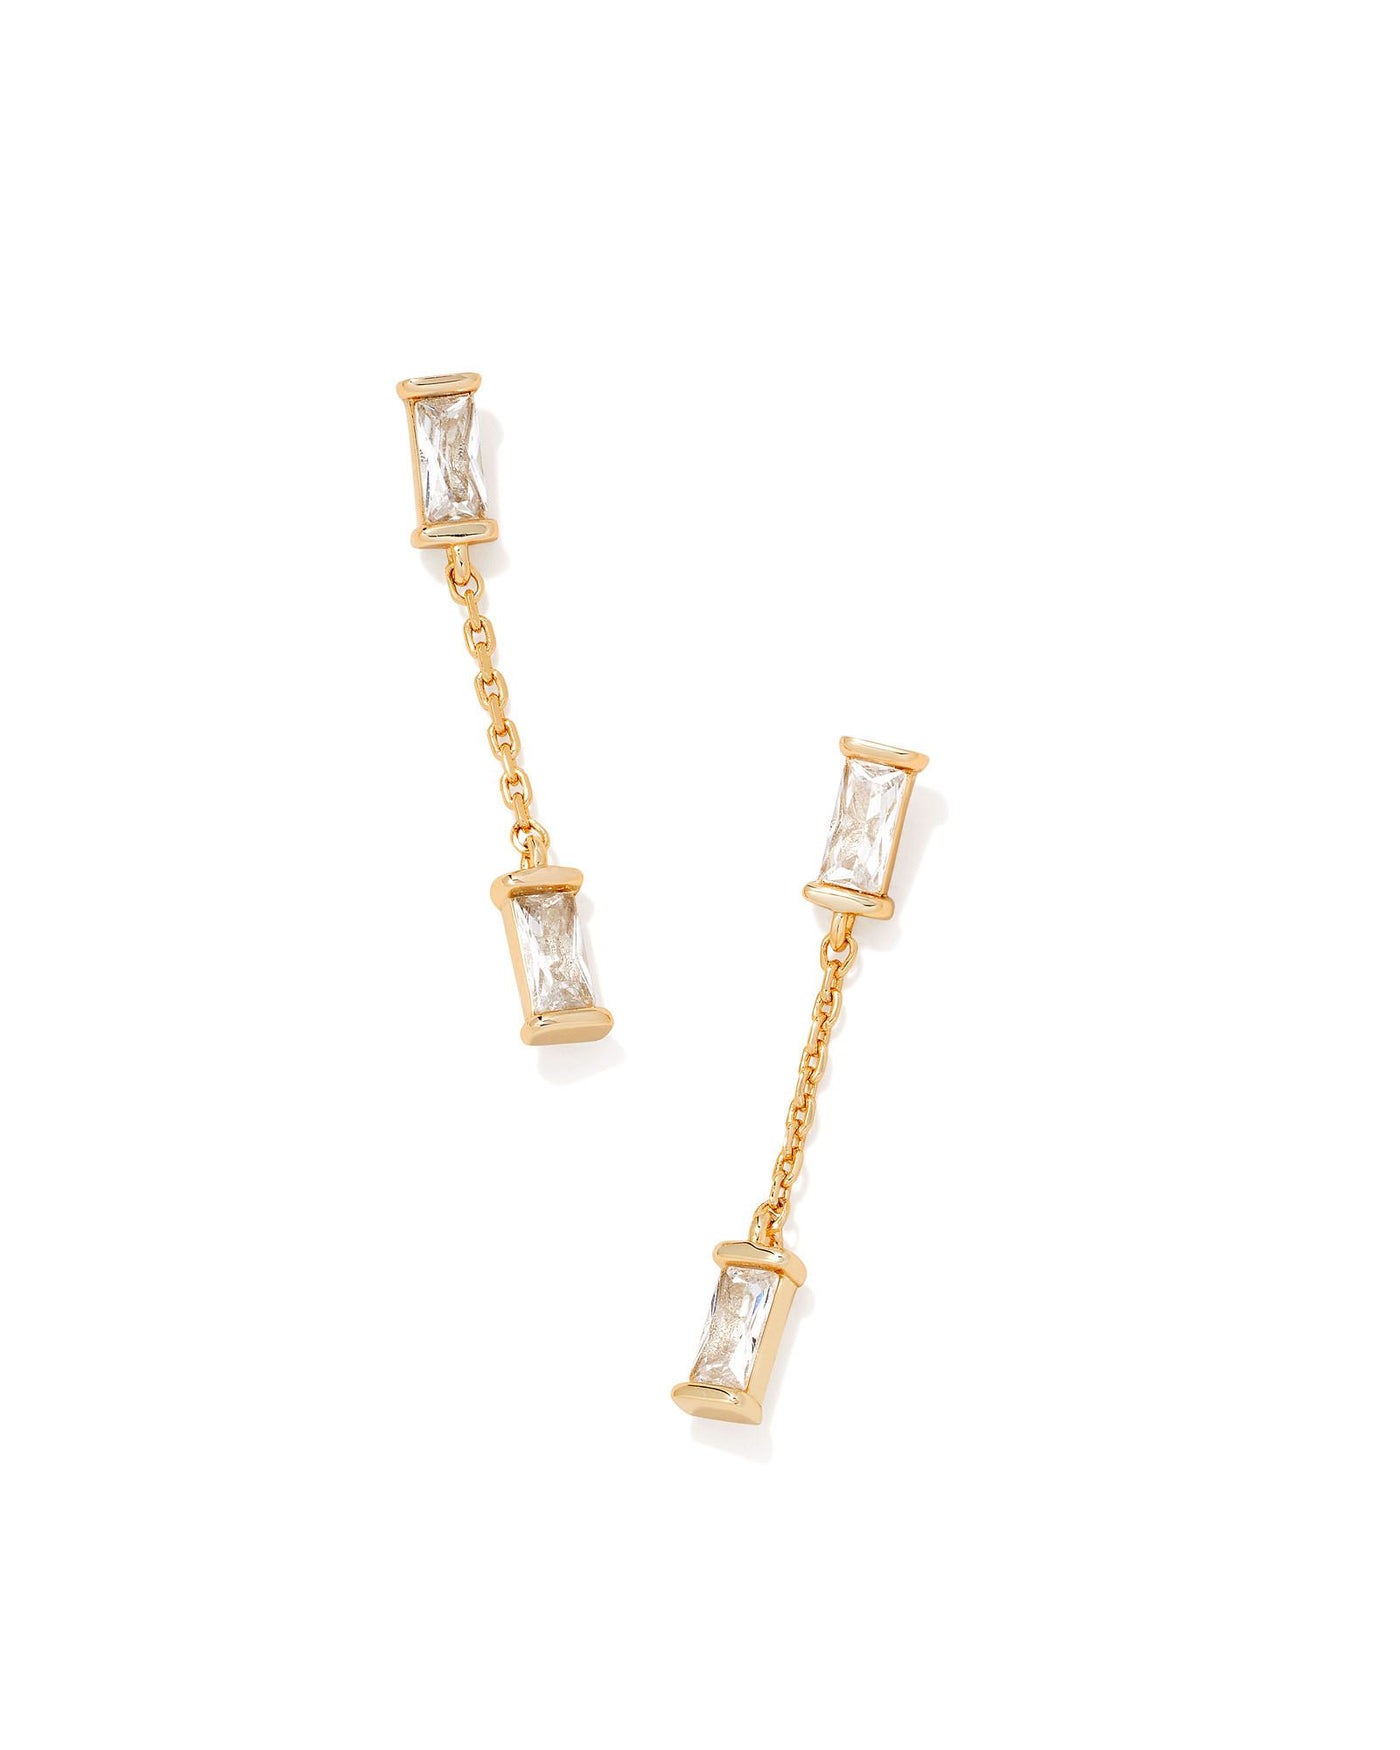 Kendra Scott Juliette Gold Drop Earrings in White Crystal-Earrings-Kendra Scott-Market Street Nest, Fashionable Clothing, Shoes and Home Décor Located in Mabank, TX